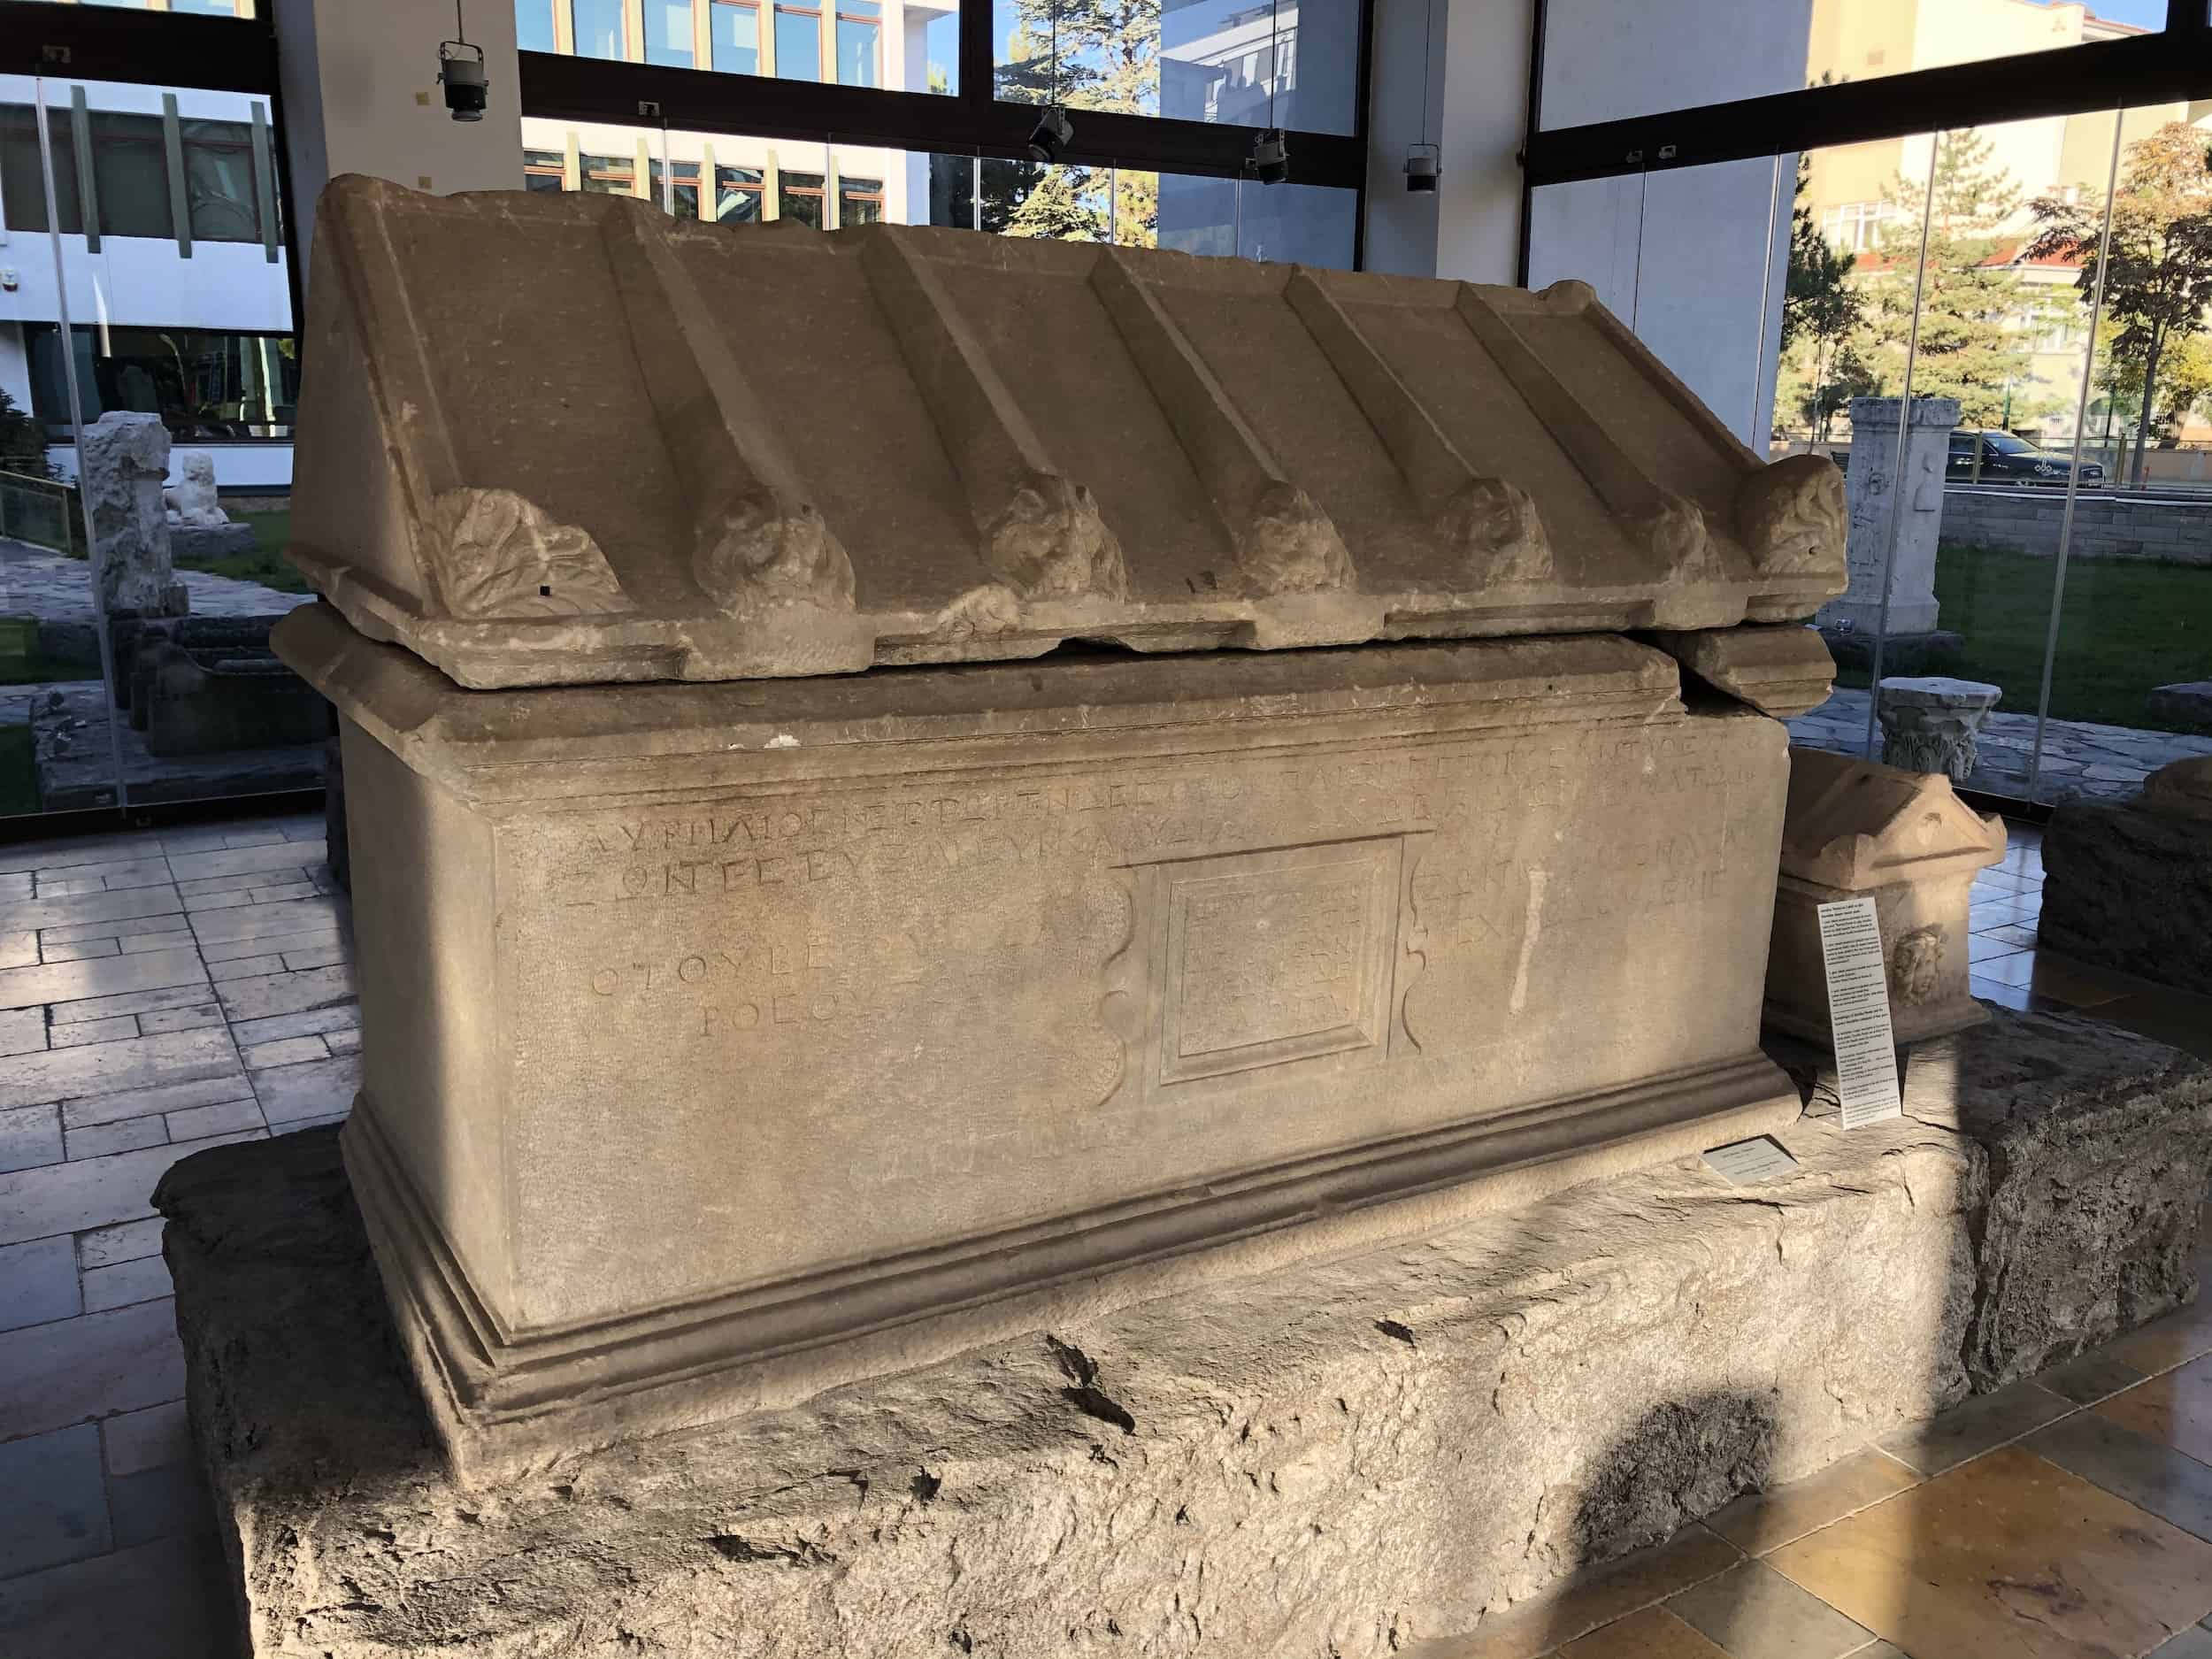 Sarcophagus from the Late Roman period